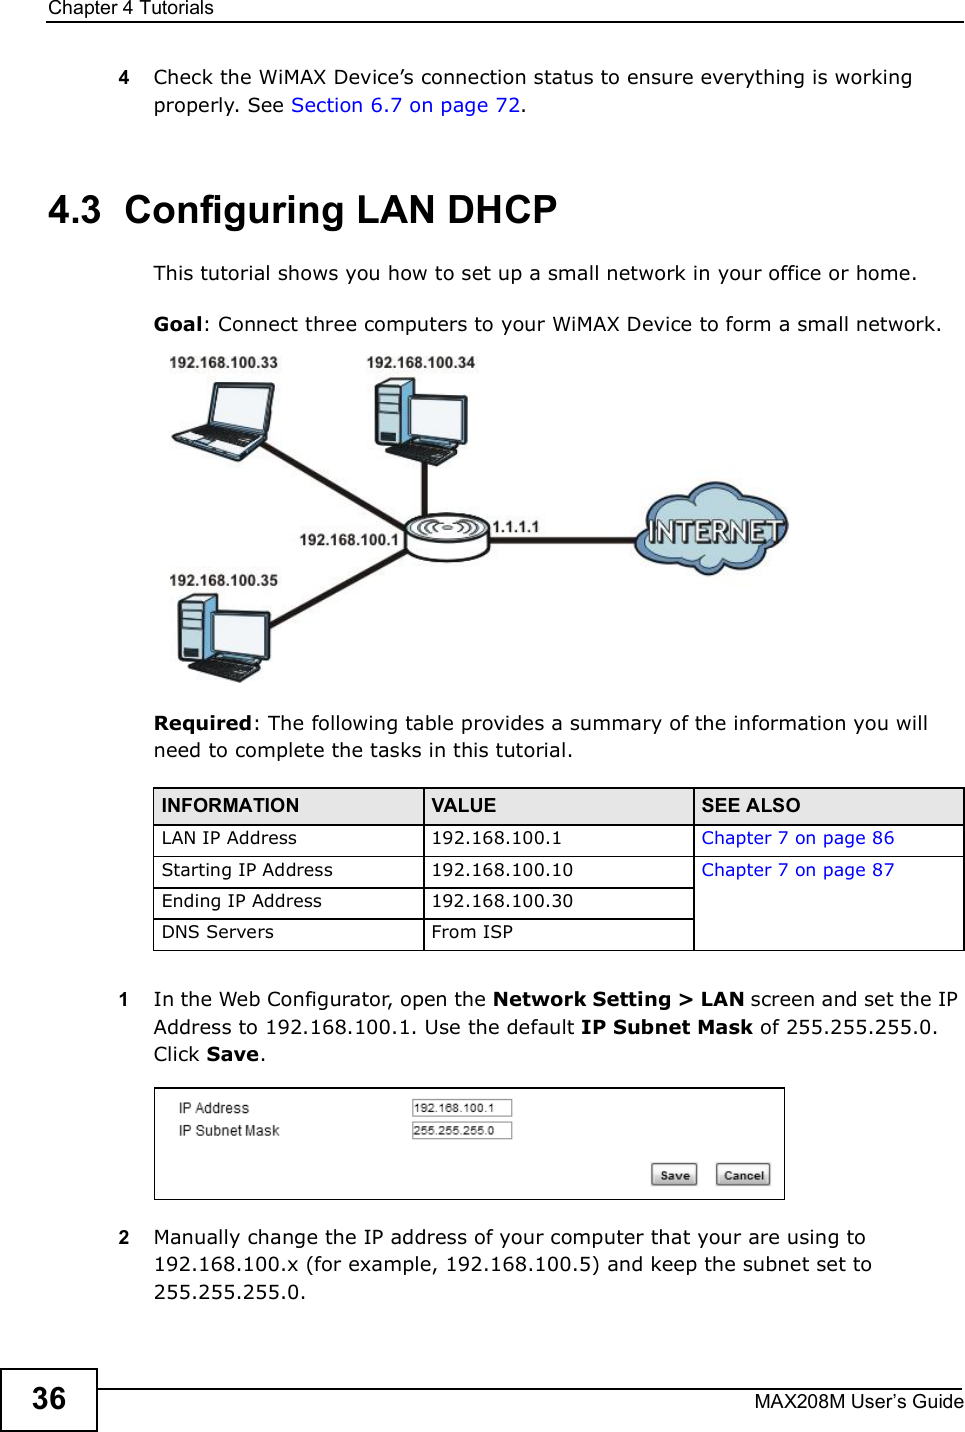 Chapter 4TutorialsMAX208M User s Guide364Check the WiMAX Device s connection status to ensure everything is working properly. See Section 6.7 on page 72.4.3  Configuring LAN DHCPThis tutorial shows you how to set up a small network in your office or home.Goal: Connect three computers to your WiMAX Device to form a small network. Required: The following table provides a summary of the information you will need to complete the tasks in this tutorial. 1In the Web Configurator, open the Network Setting &gt; LAN screen and set the IP Address to 192.168.100.1. Use the default IP Subnet Mask of 255.255.255.0. Click Save.2Manually change the IP address of your computer that your are using to 192.168.100.x (for example, 192.168.100.5) and keep the subnet set to 255.255.255.0.INFORMATION VALUE SEE ALSOLAN IP Address192.168.100.1 Chapter 7 on page 86Starting IP Address192.168.100.10 Chapter 7 on page 87Ending IP Address192.168.100.30DNS ServersFrom ISP